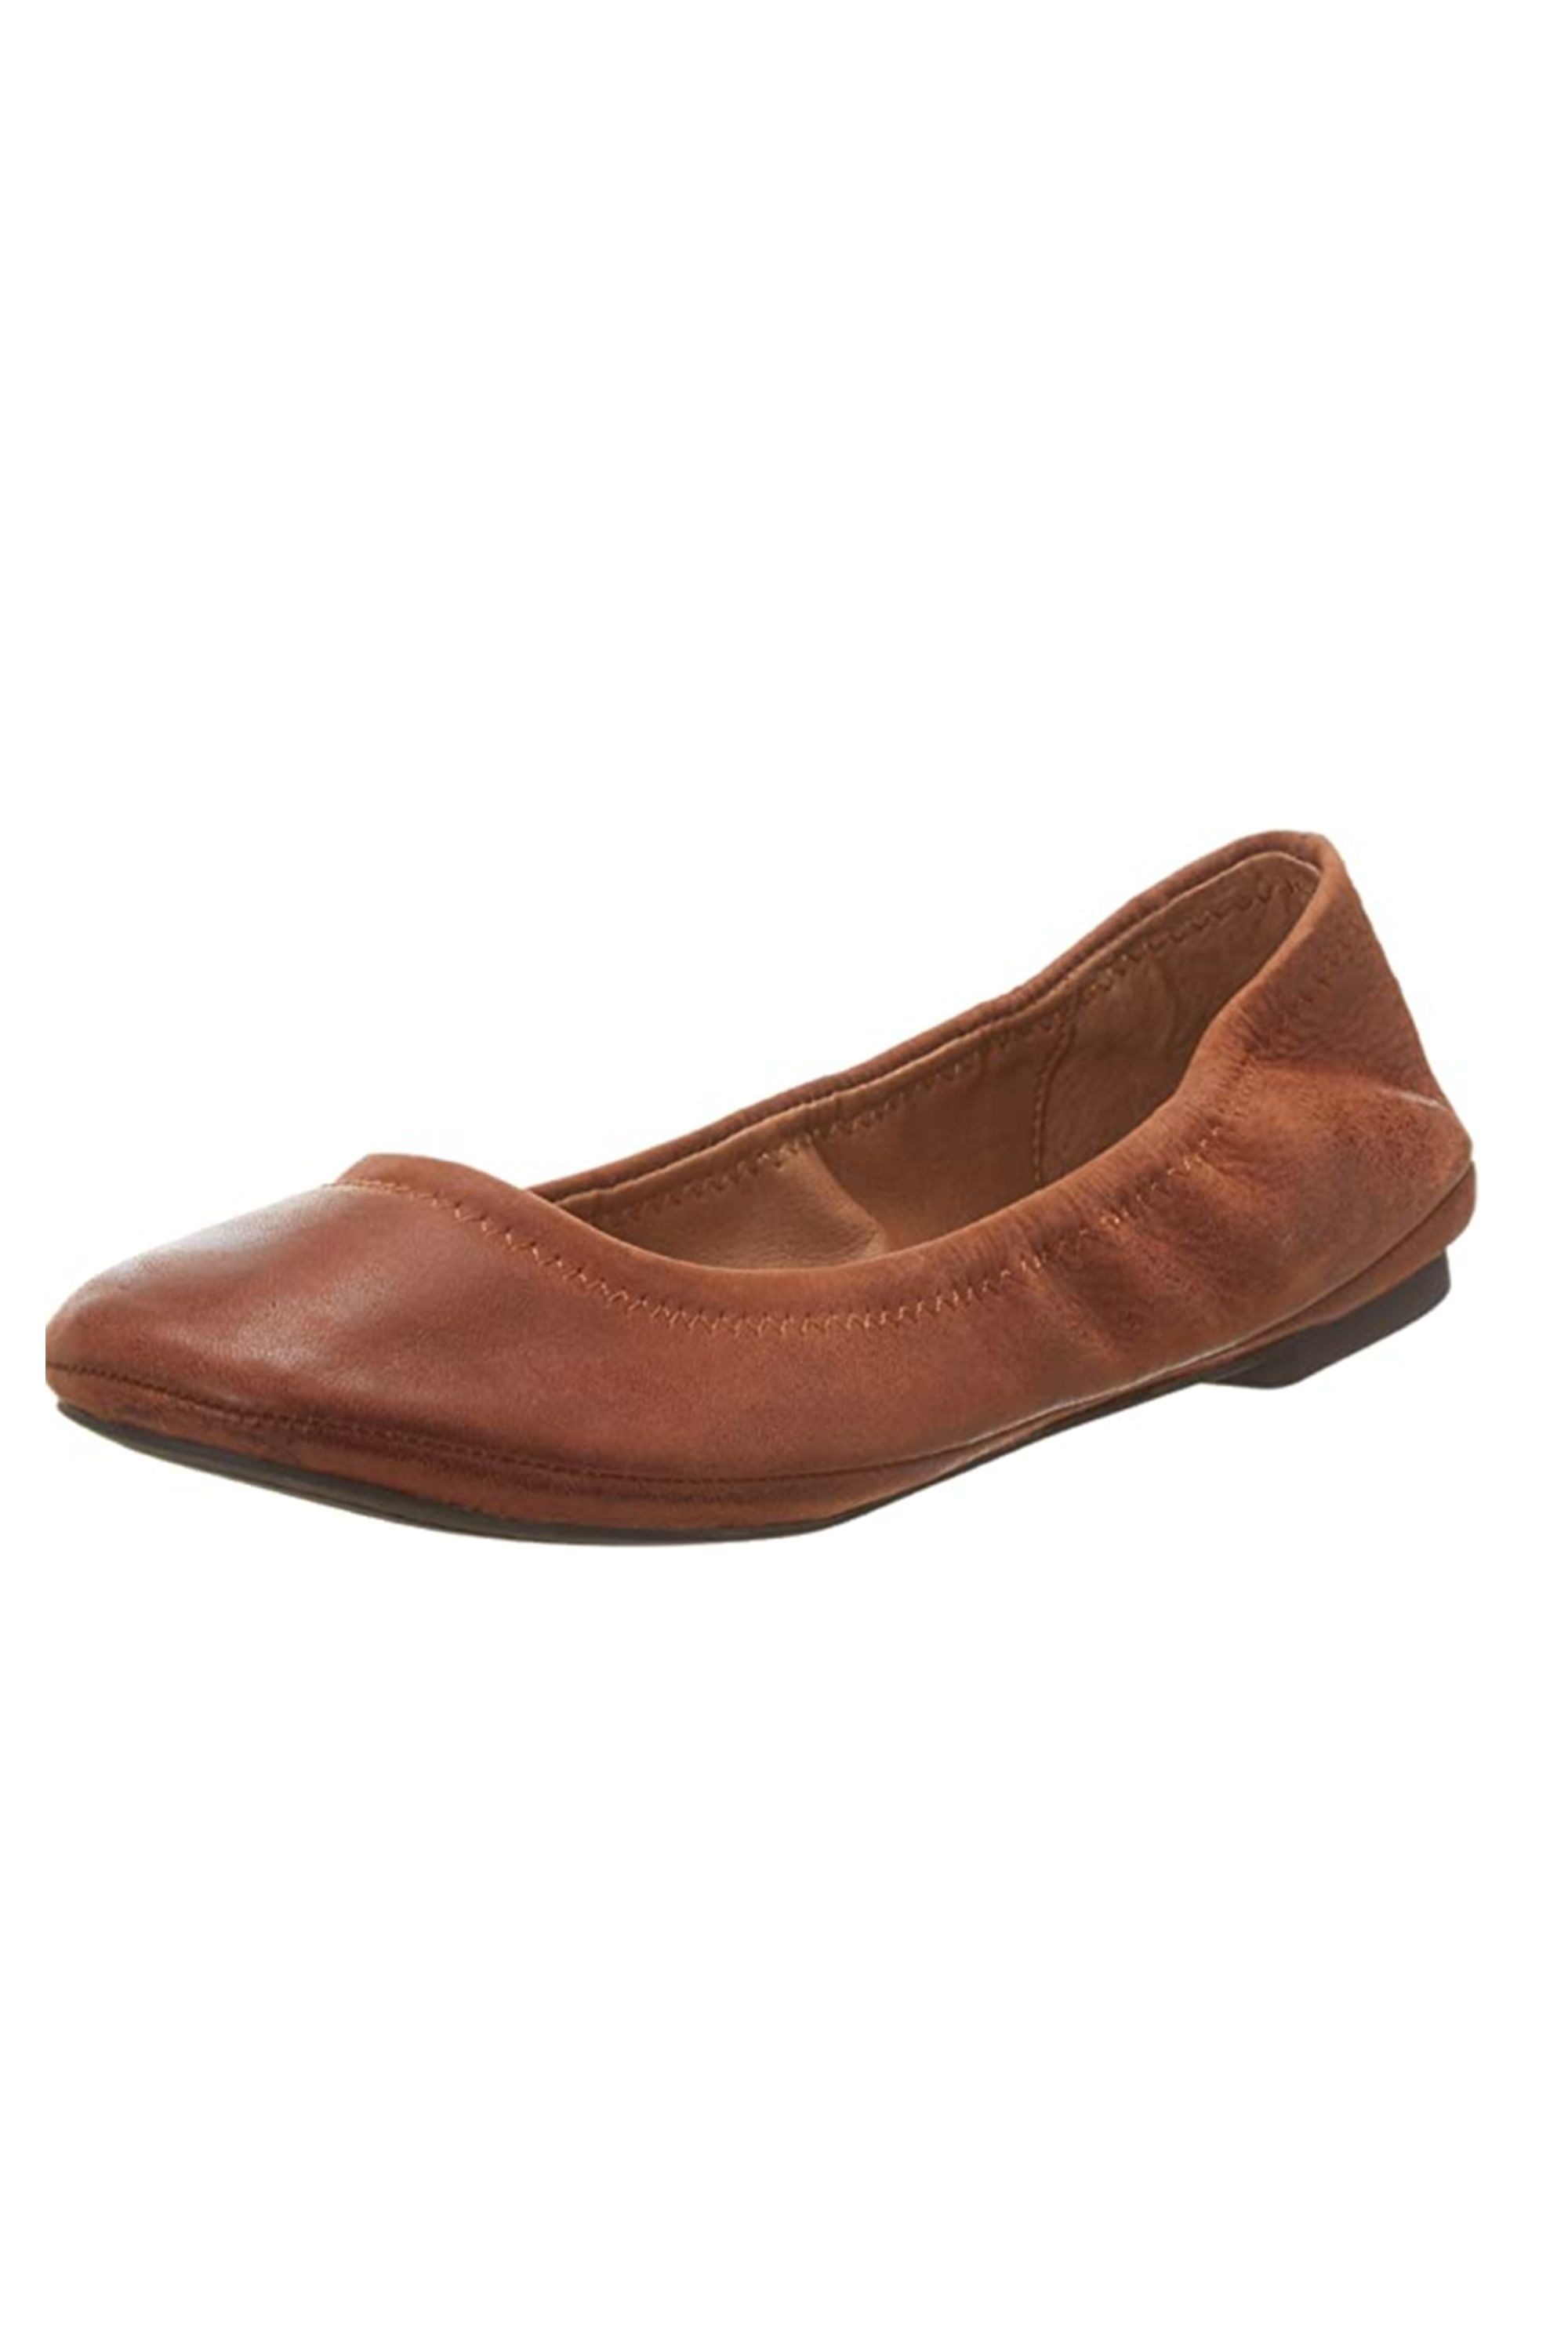 LingGT Leather Ballet Flats Women Knot Soft Comfort Slip on Shoes Color : Brown, Size : US 8